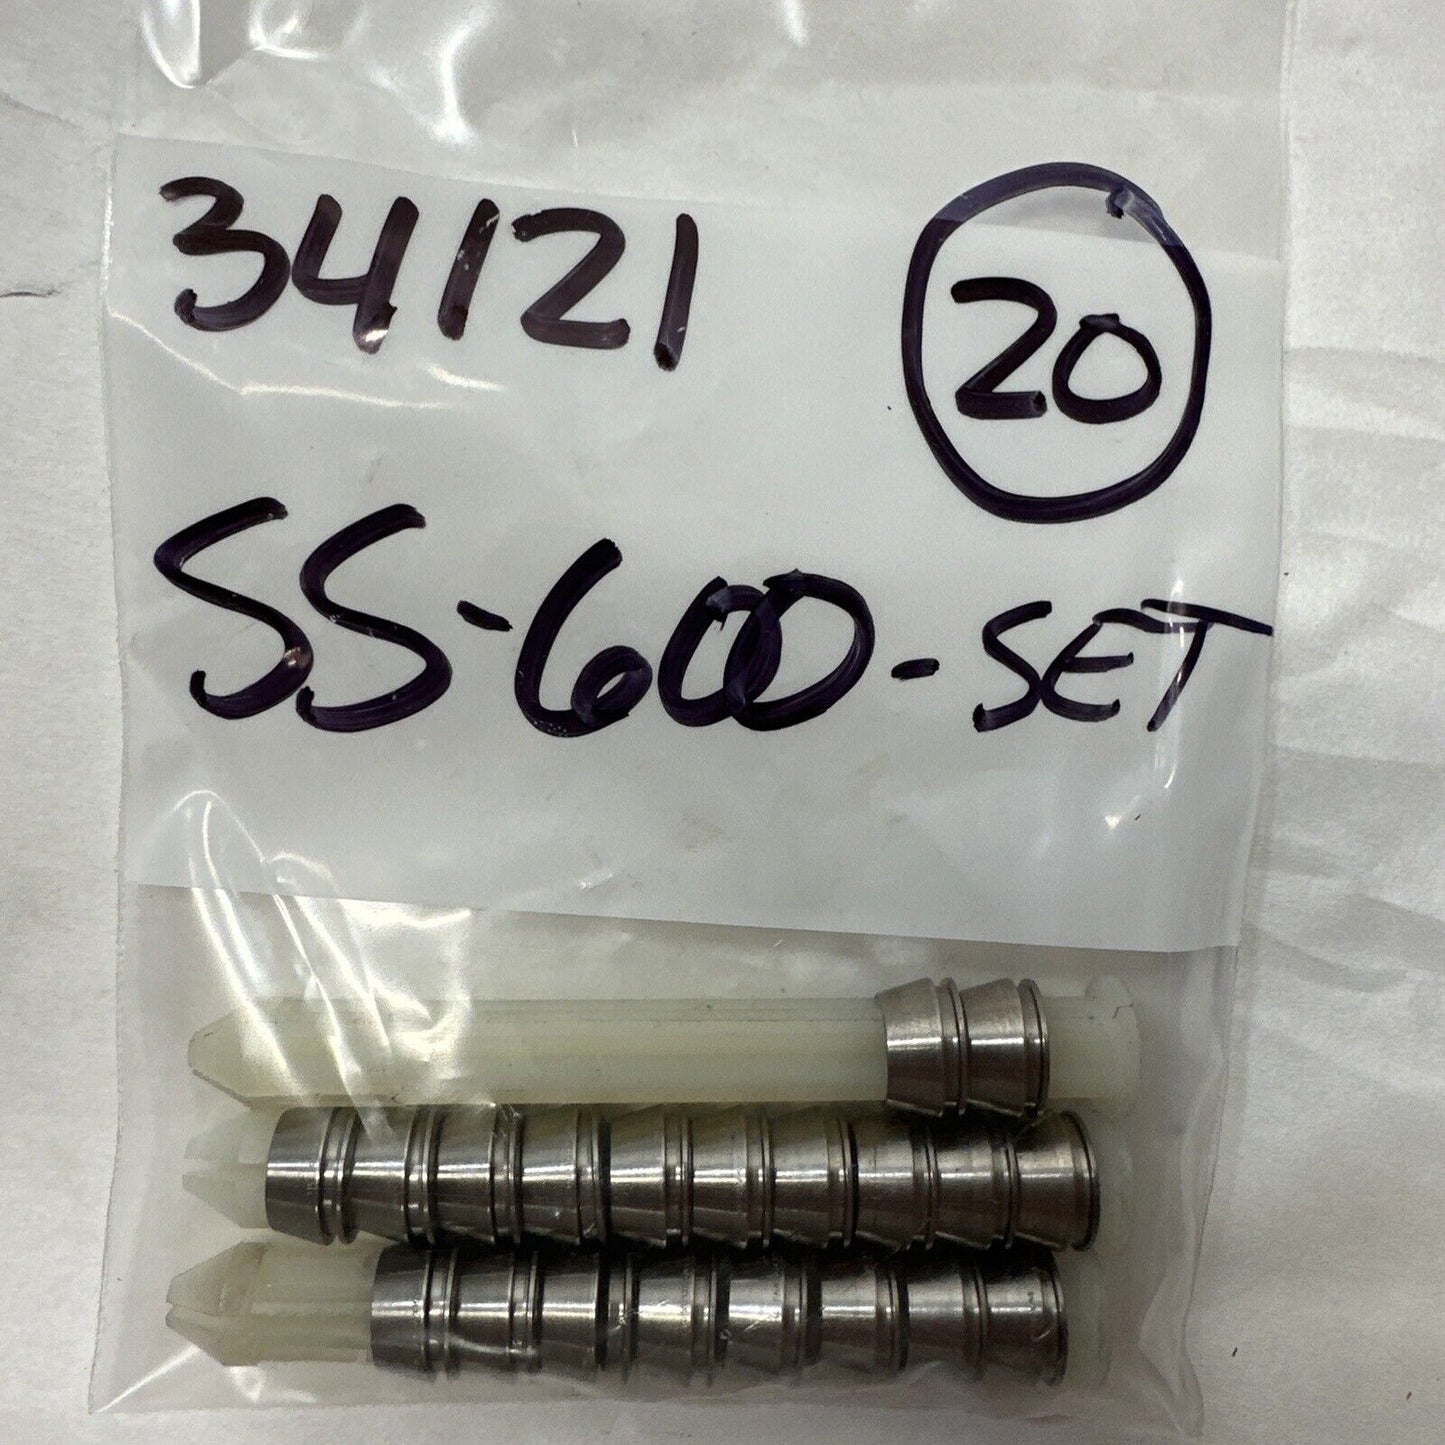 Lot of 20 Swagelok Stainless Steel Male Connector Tube SS-600-Set